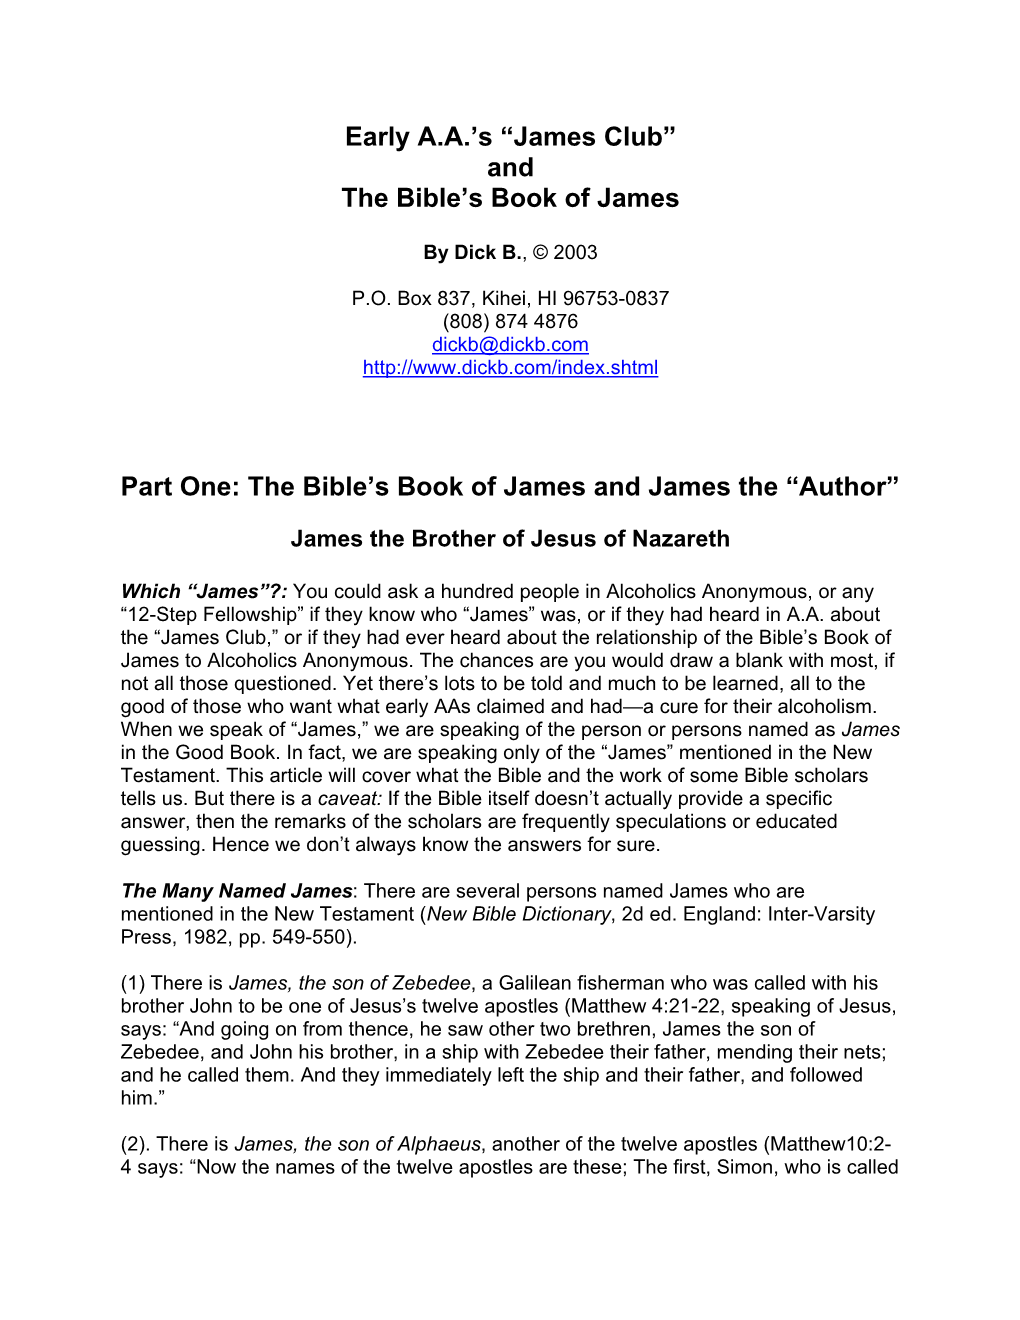 Early AA's “James Club” and the Bible's Book of James